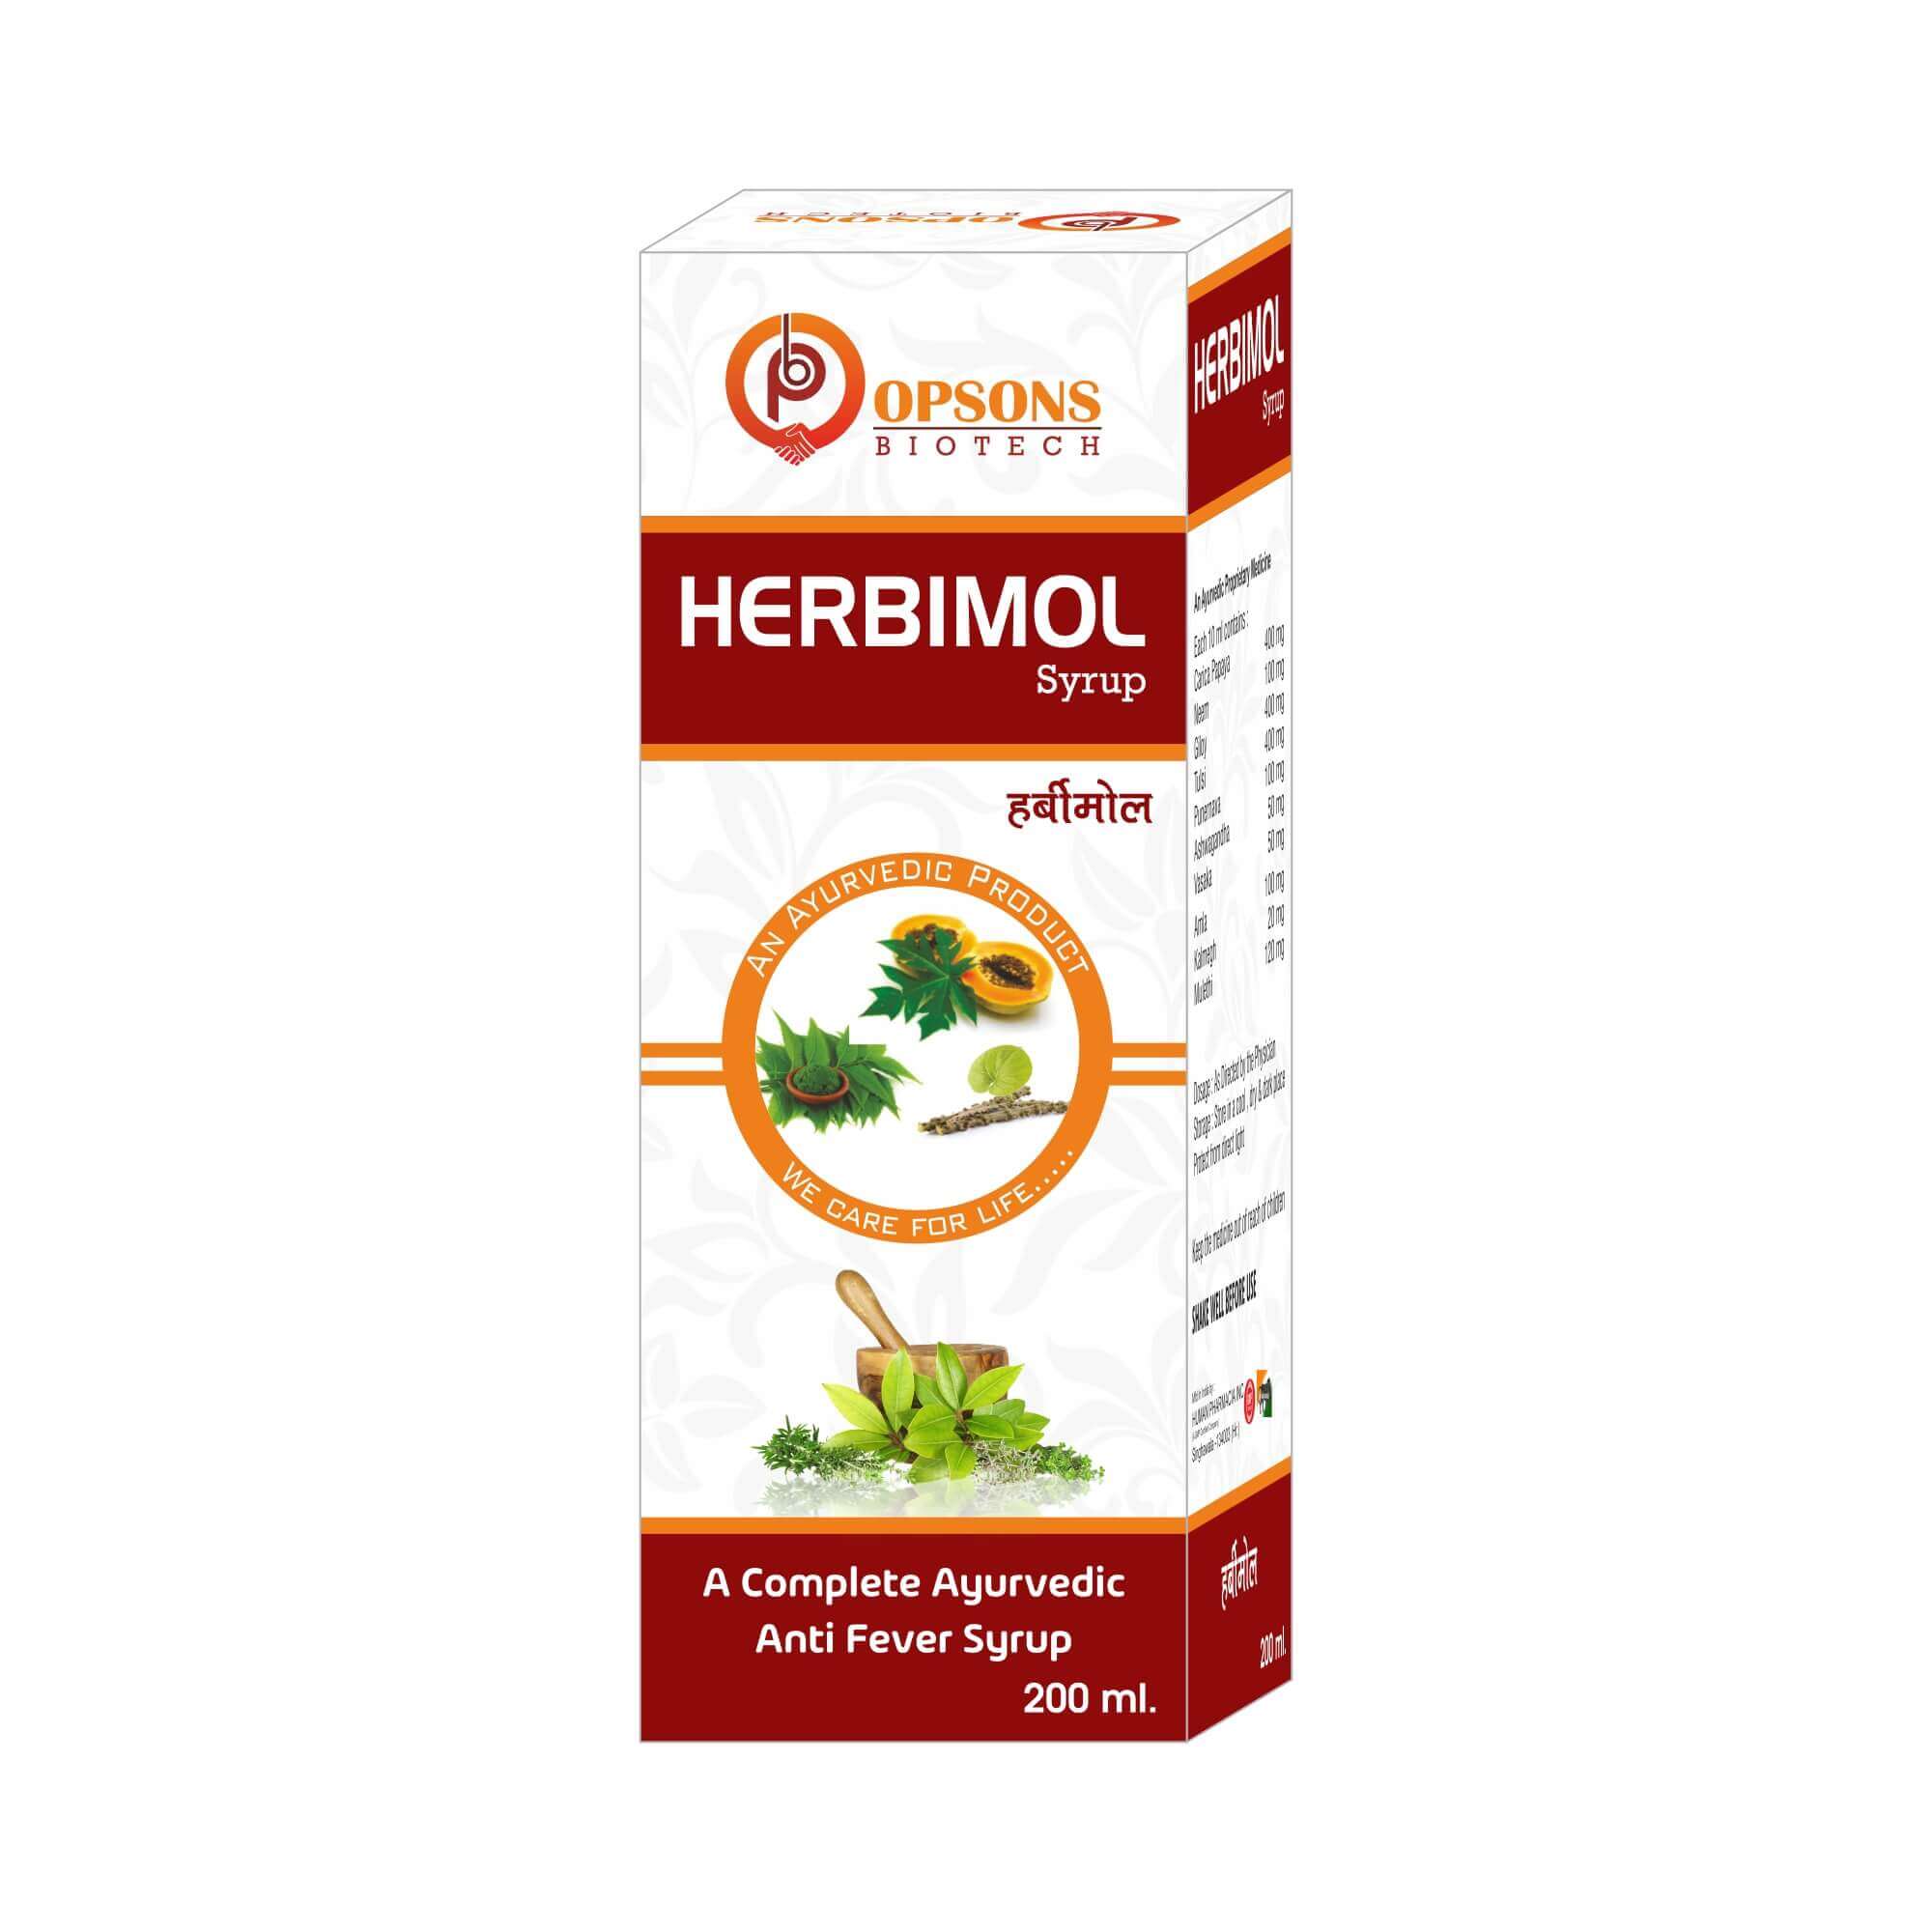 Product Name: Herbimol, Compositions of Complete Ayurvedic Anti Fever Syrup  are Complete Ayurvedic Anti Fever Syrup  - Opsons Biotech